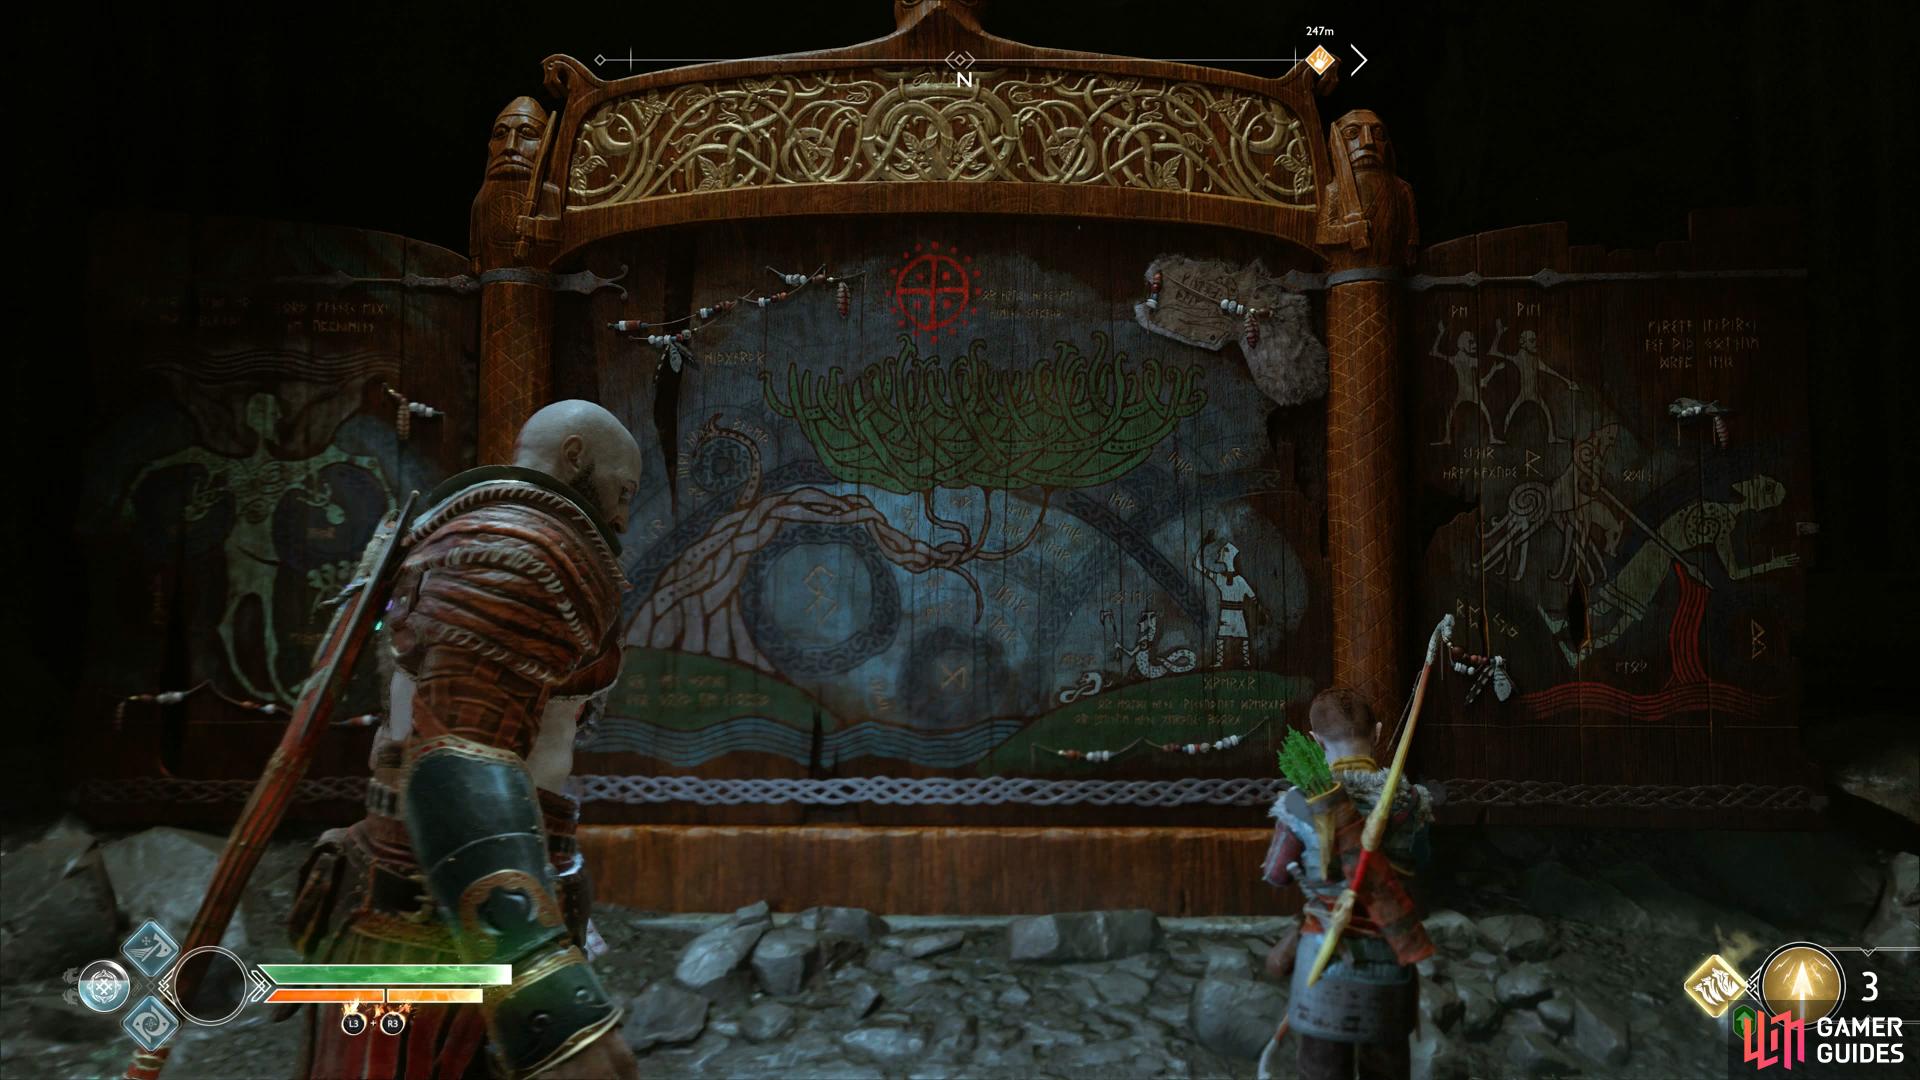 Destroy the first sap obstacle near the bridge to reach this Shrine.